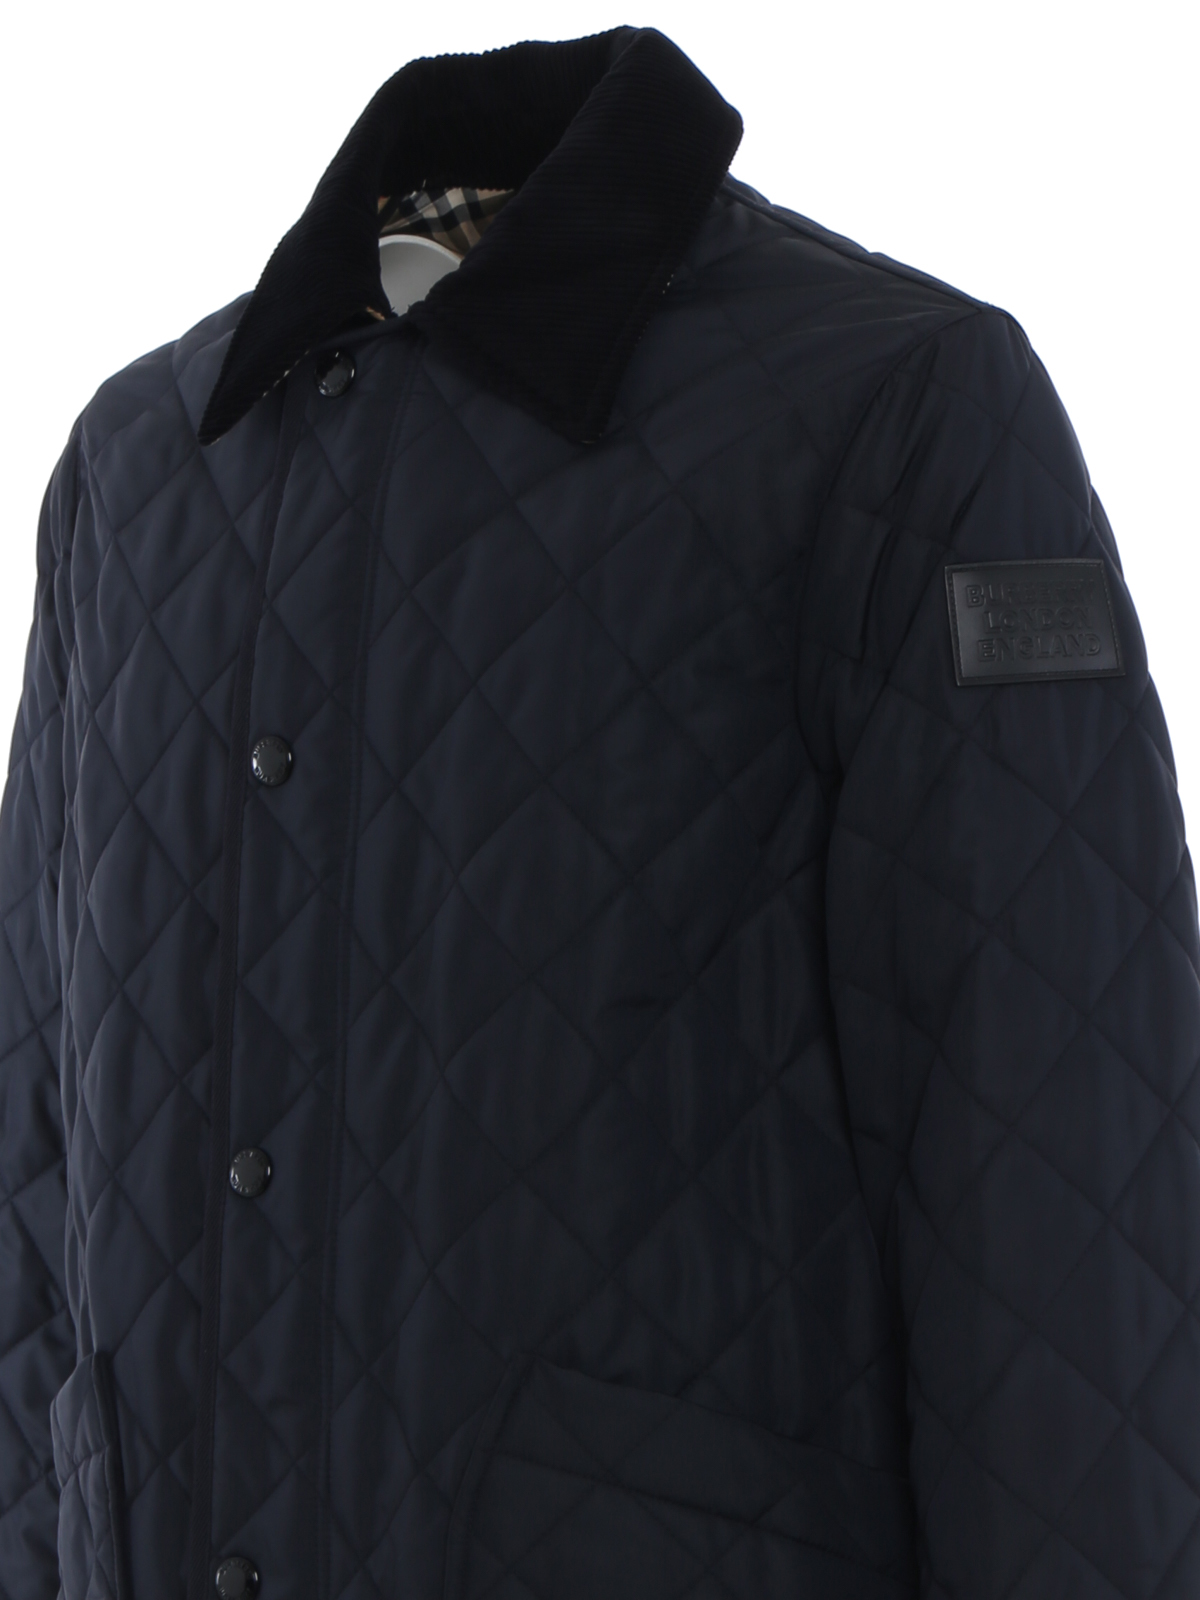 Casual jackets Burberry - Cotswold jacket - 8014322 | Shop online 